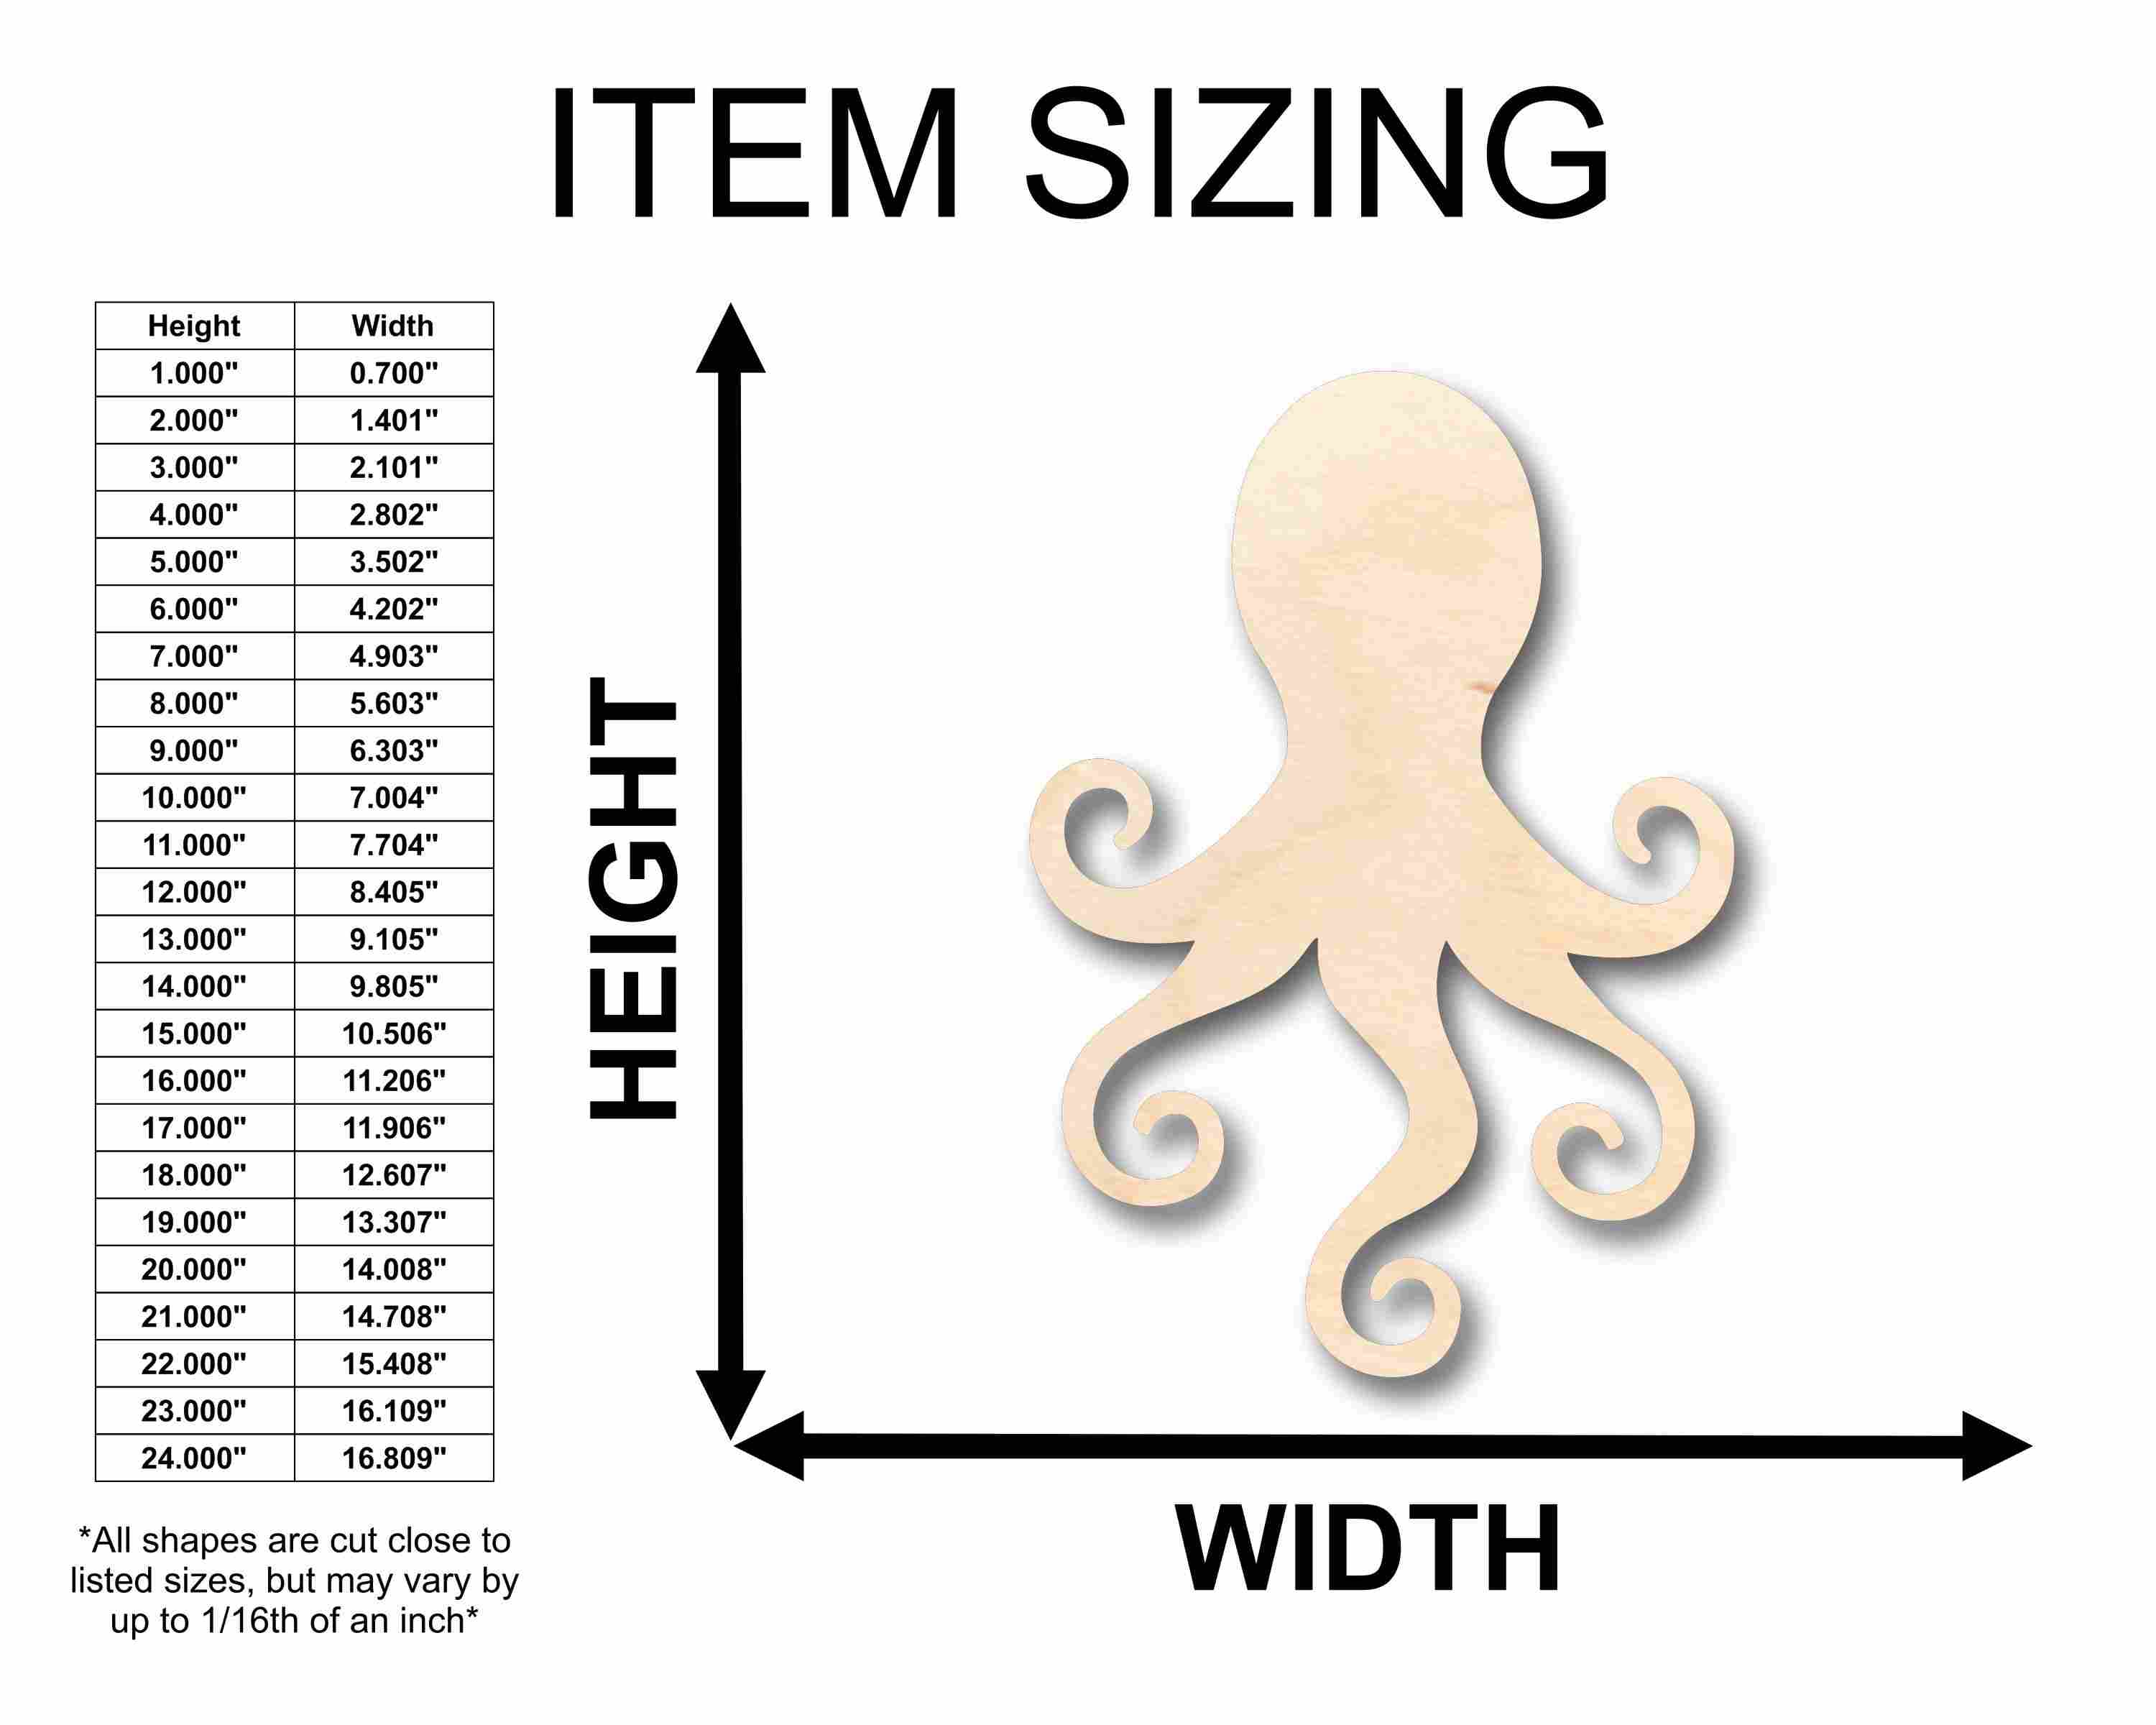 Unfinished Wood Octopus Silhouette - Craft- up to 24